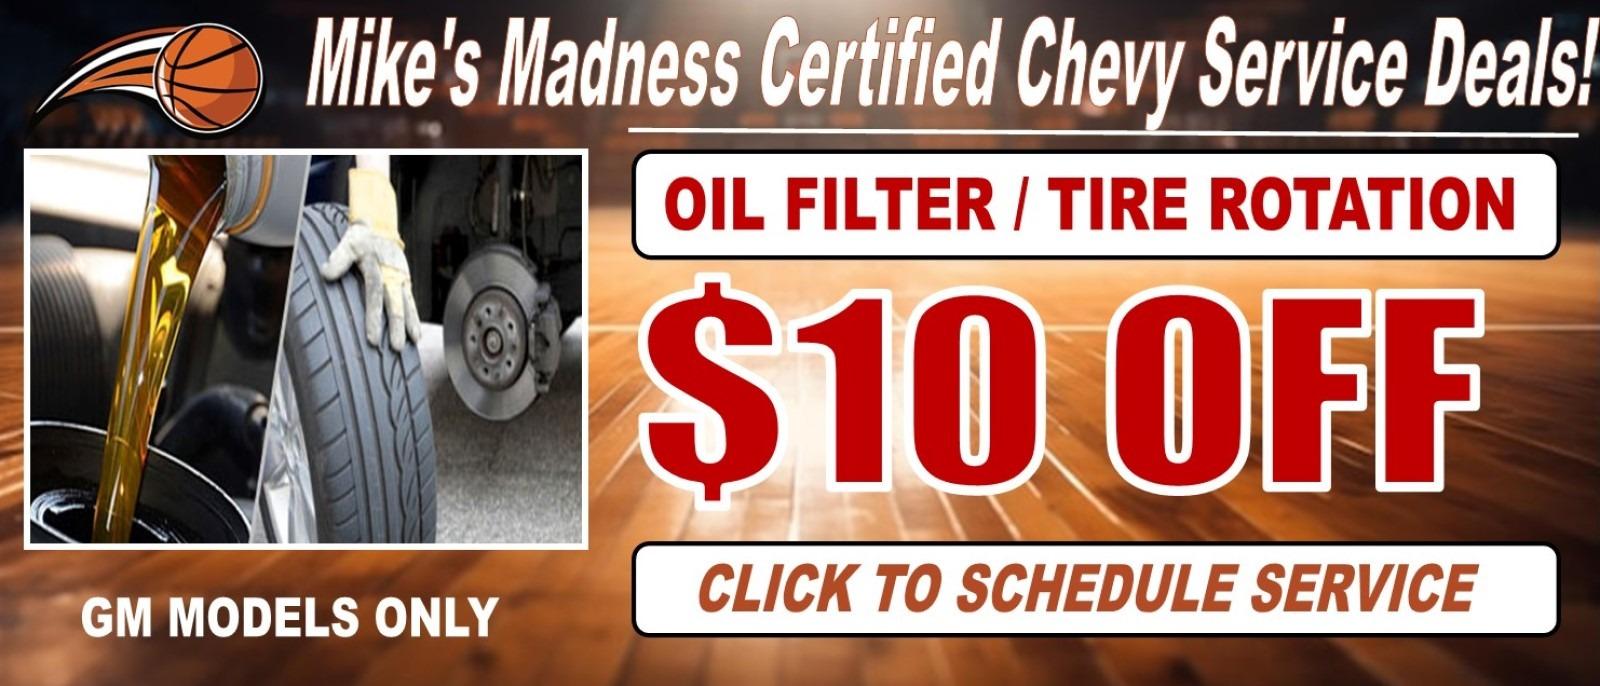 OIL FILTER CHANGE/TIRE ROTATION 
$10 OFF